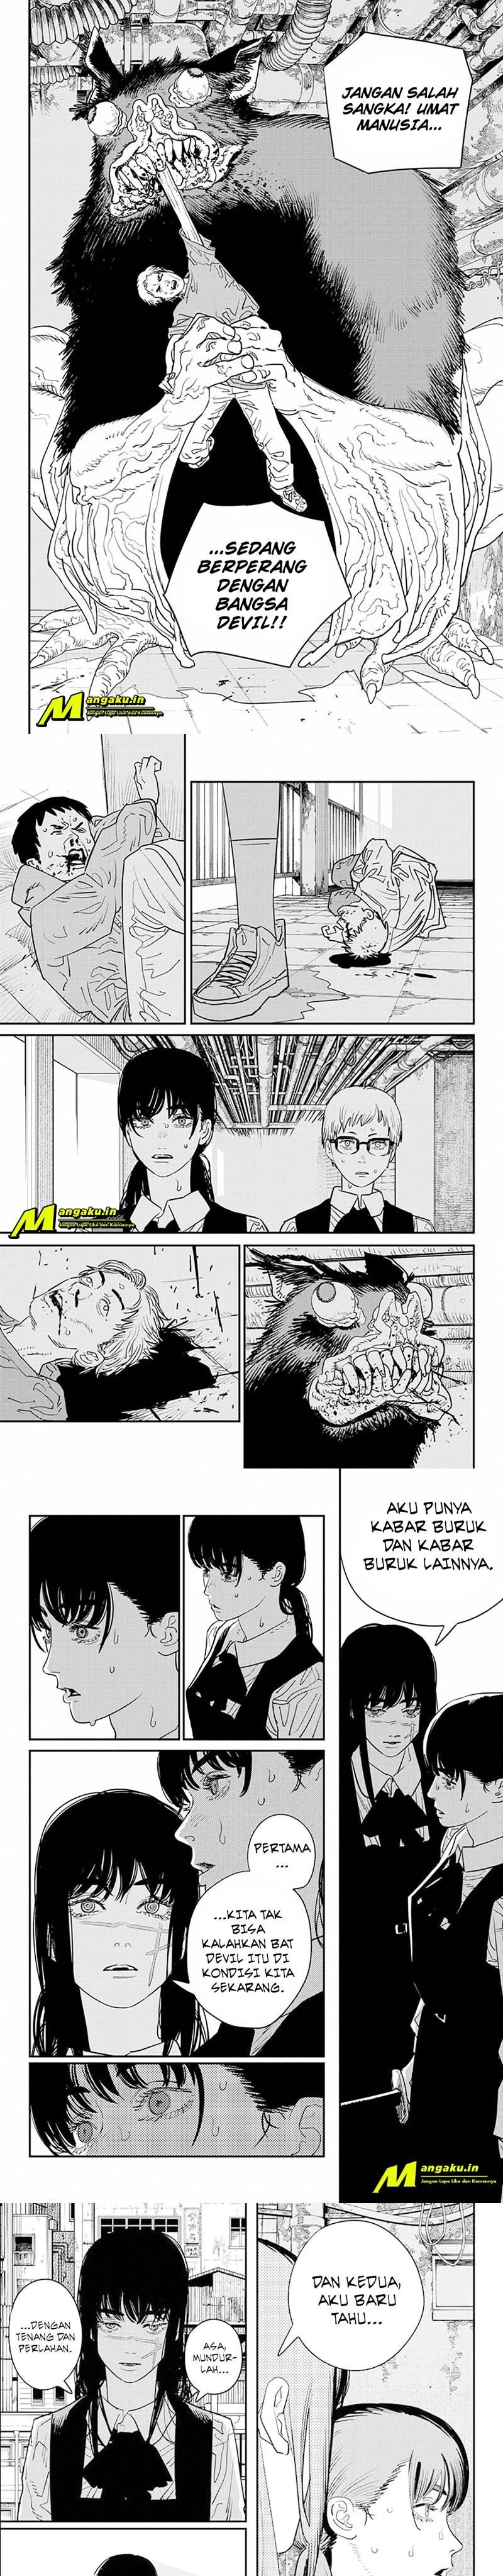 Chainsaw Man Chapter 101